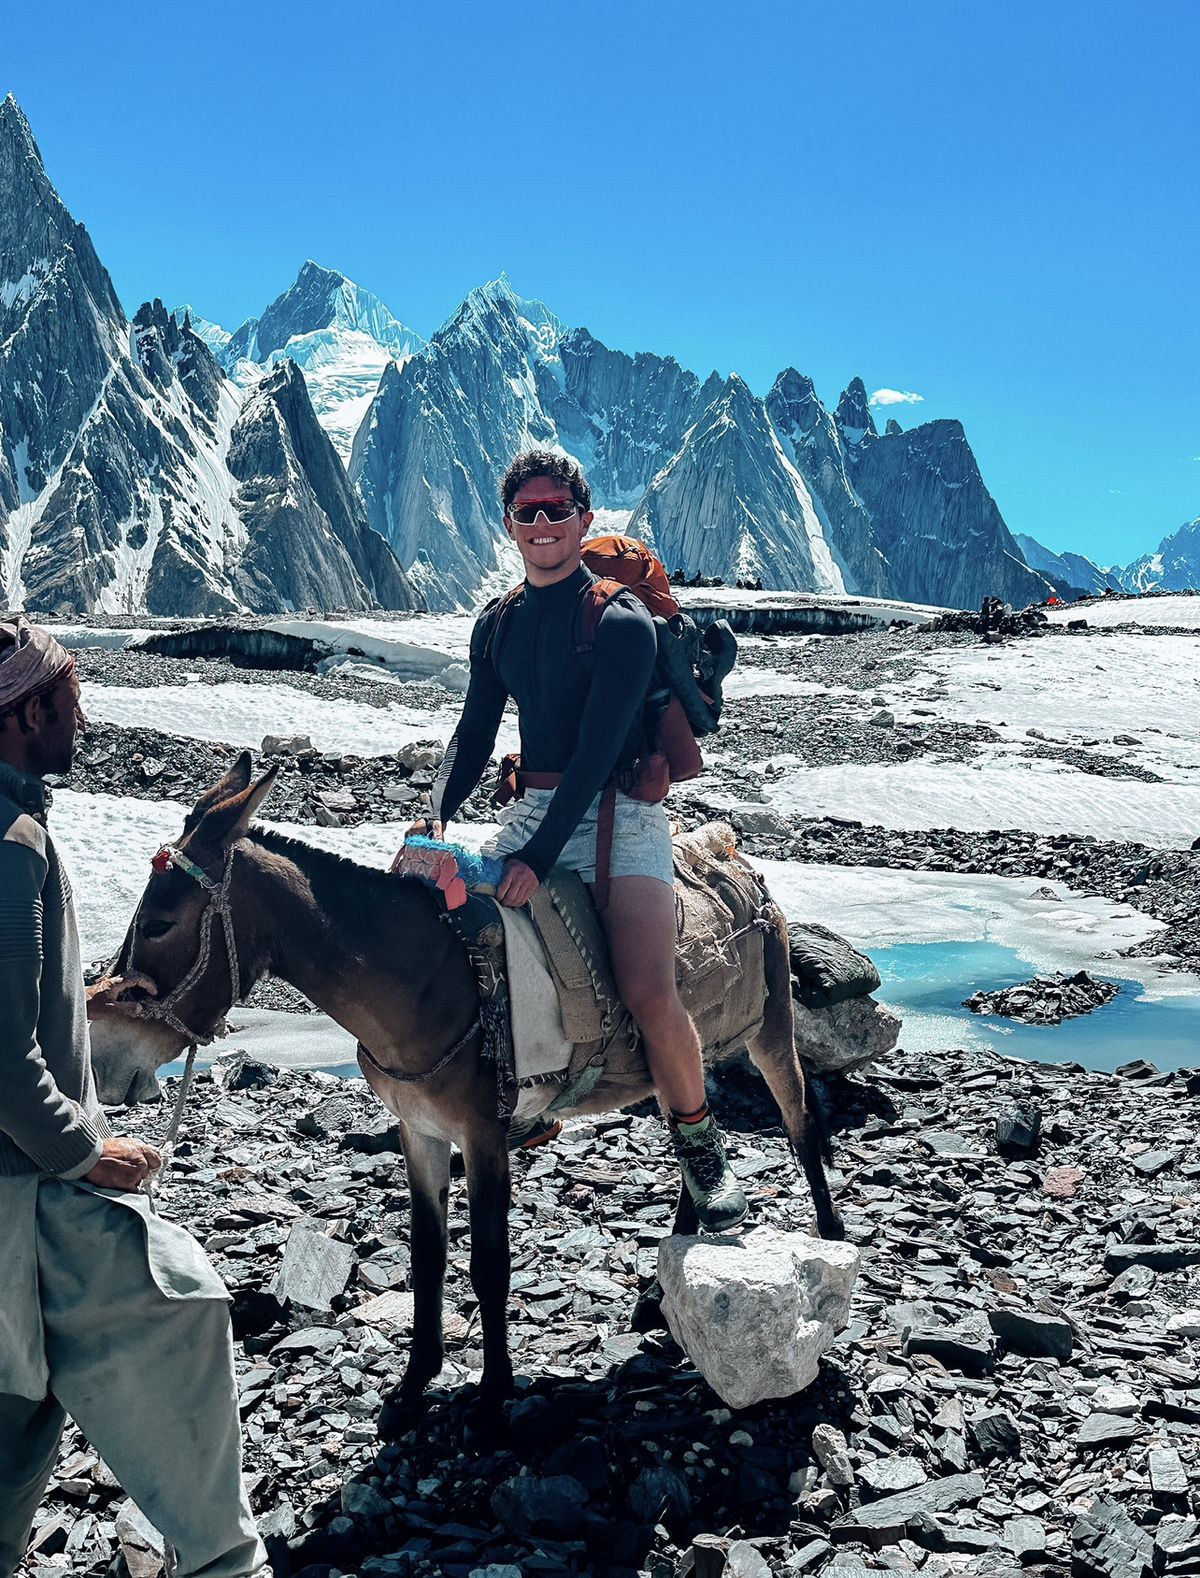 Mountain climber riding a donkey with mountains in background.